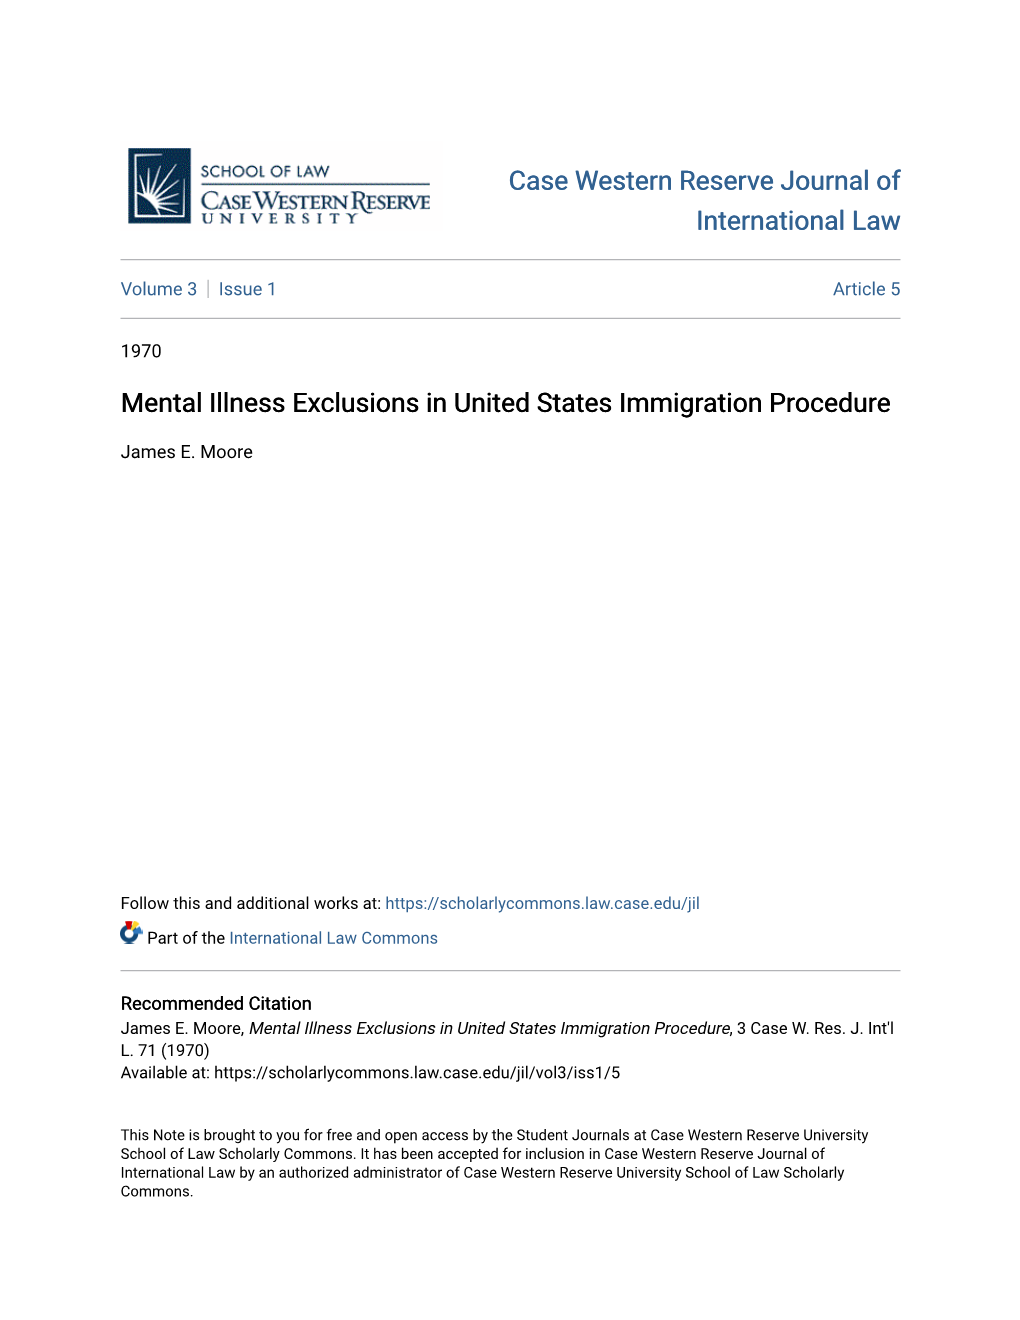 Mental Illness Exclusions in United States Immigration Procedure